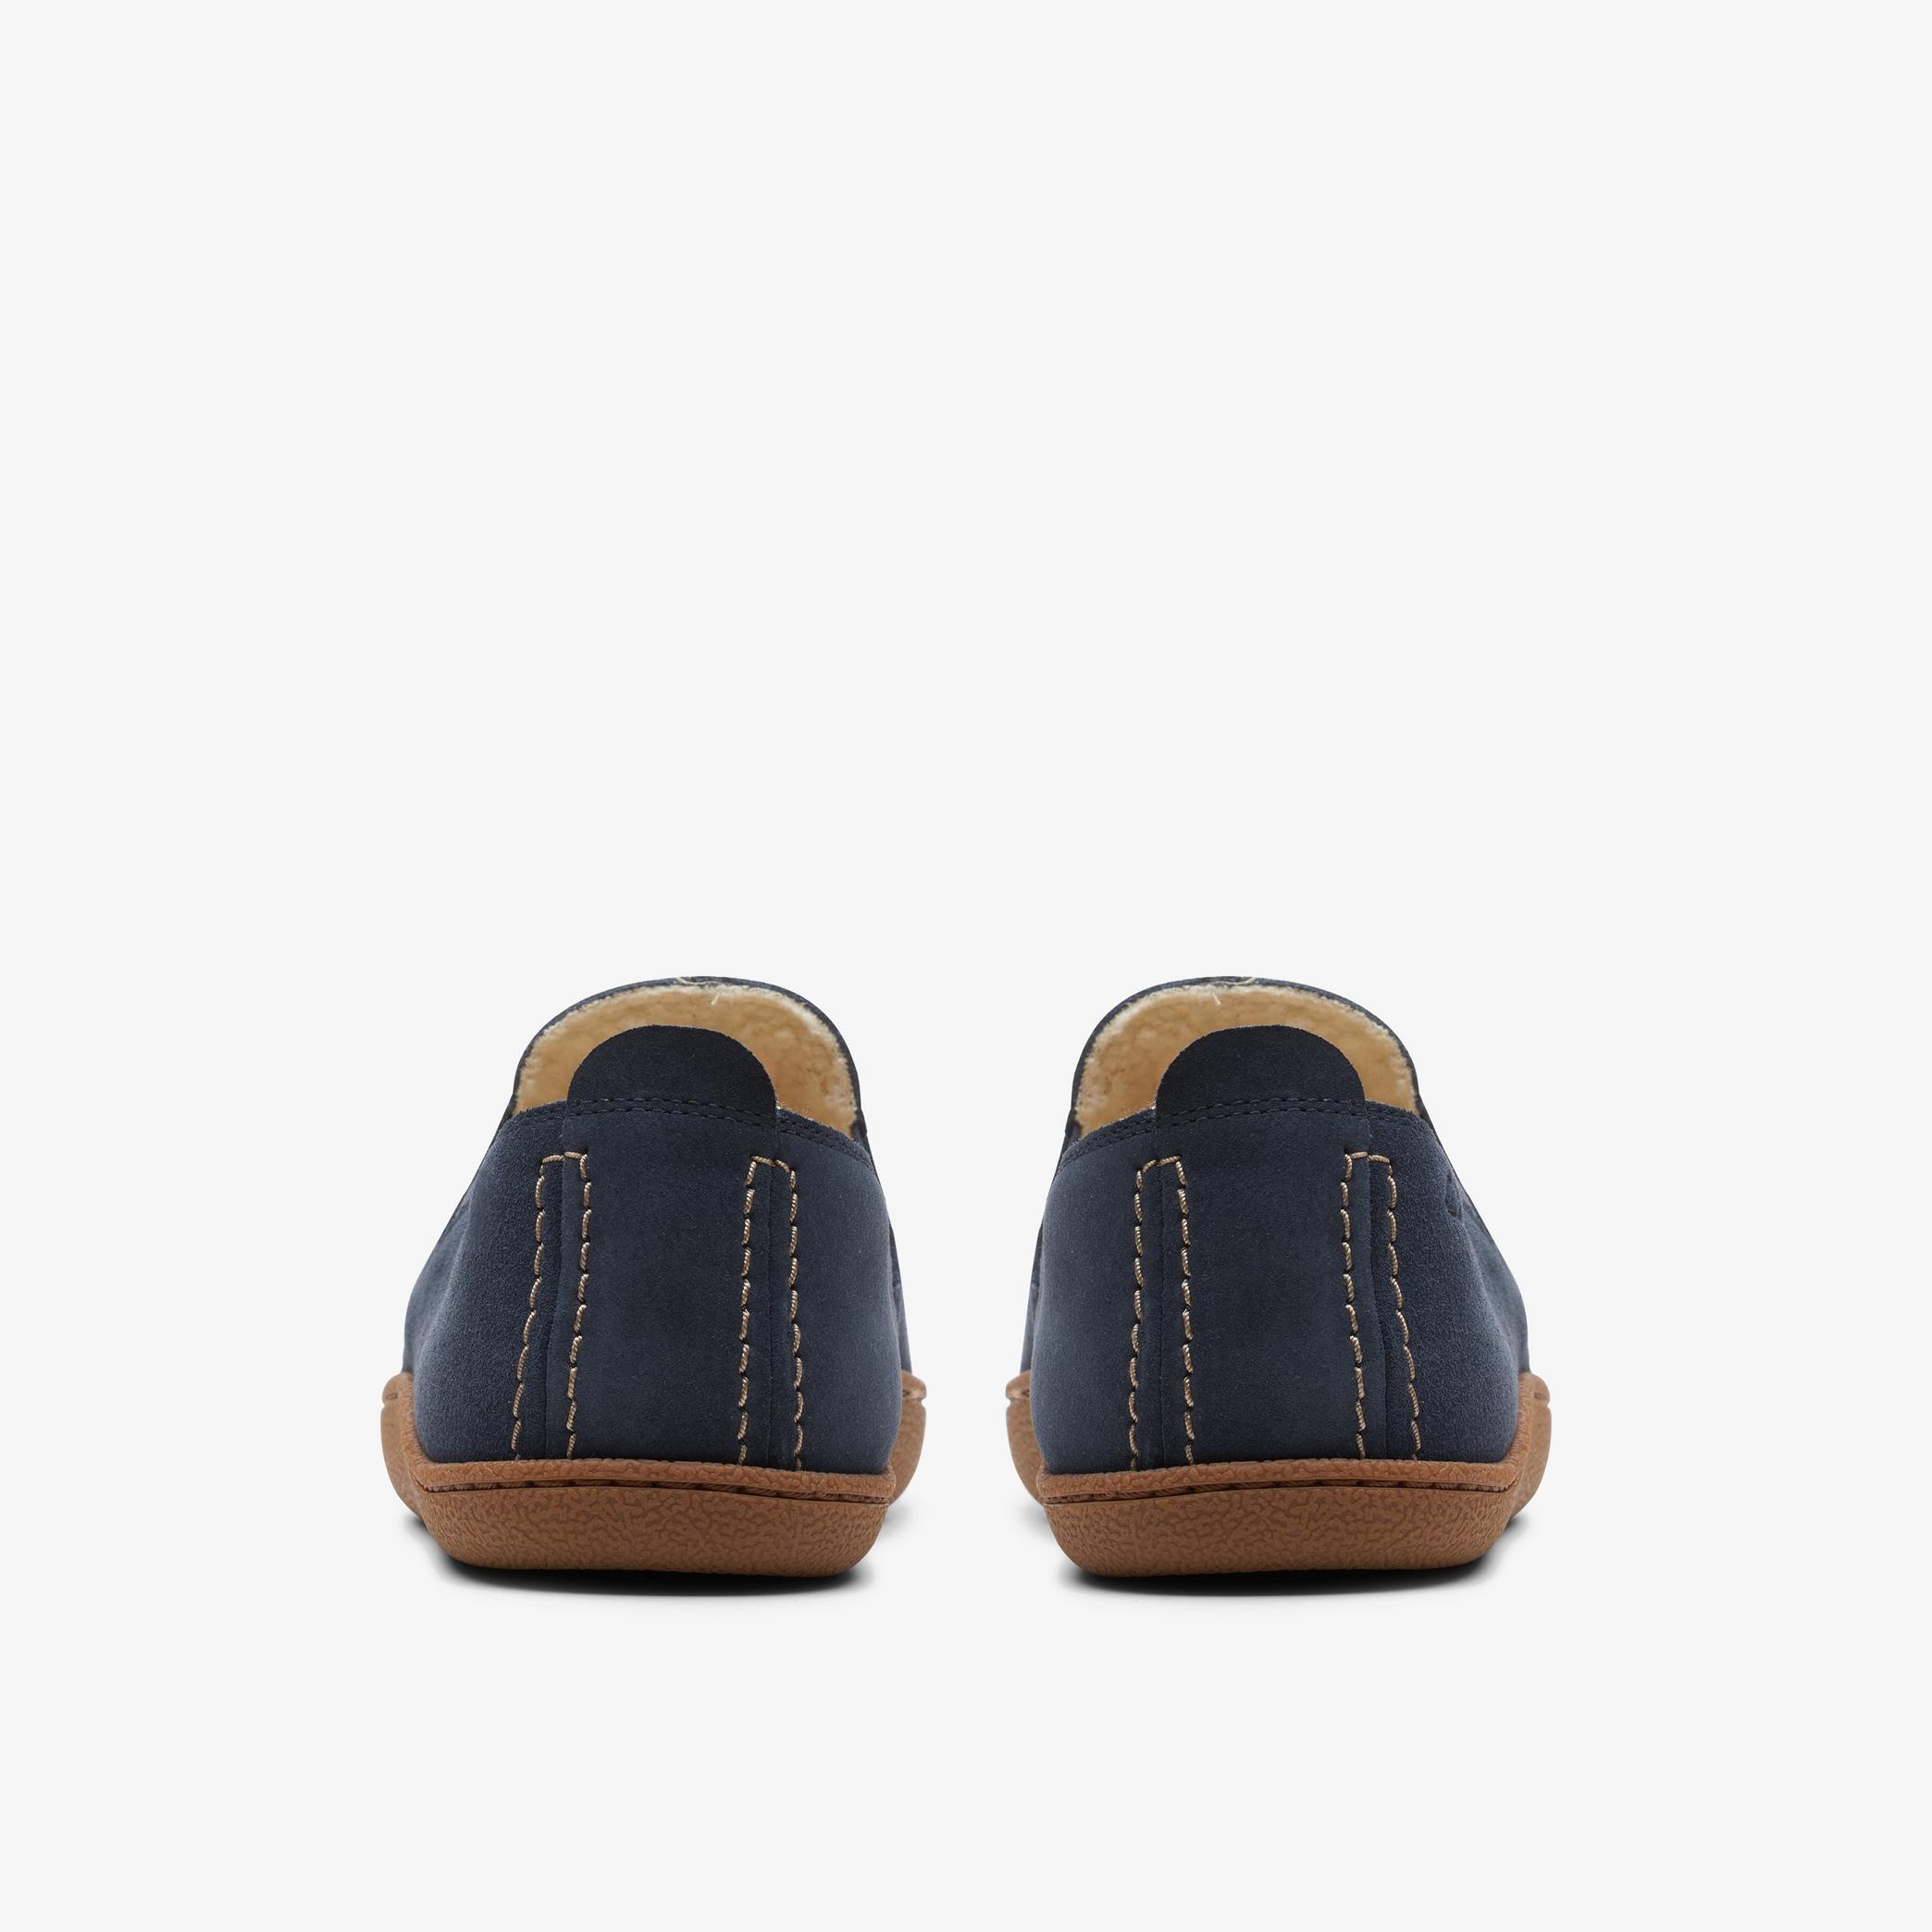 Home Mocc Navy Suede Slippers, view 5 of 6